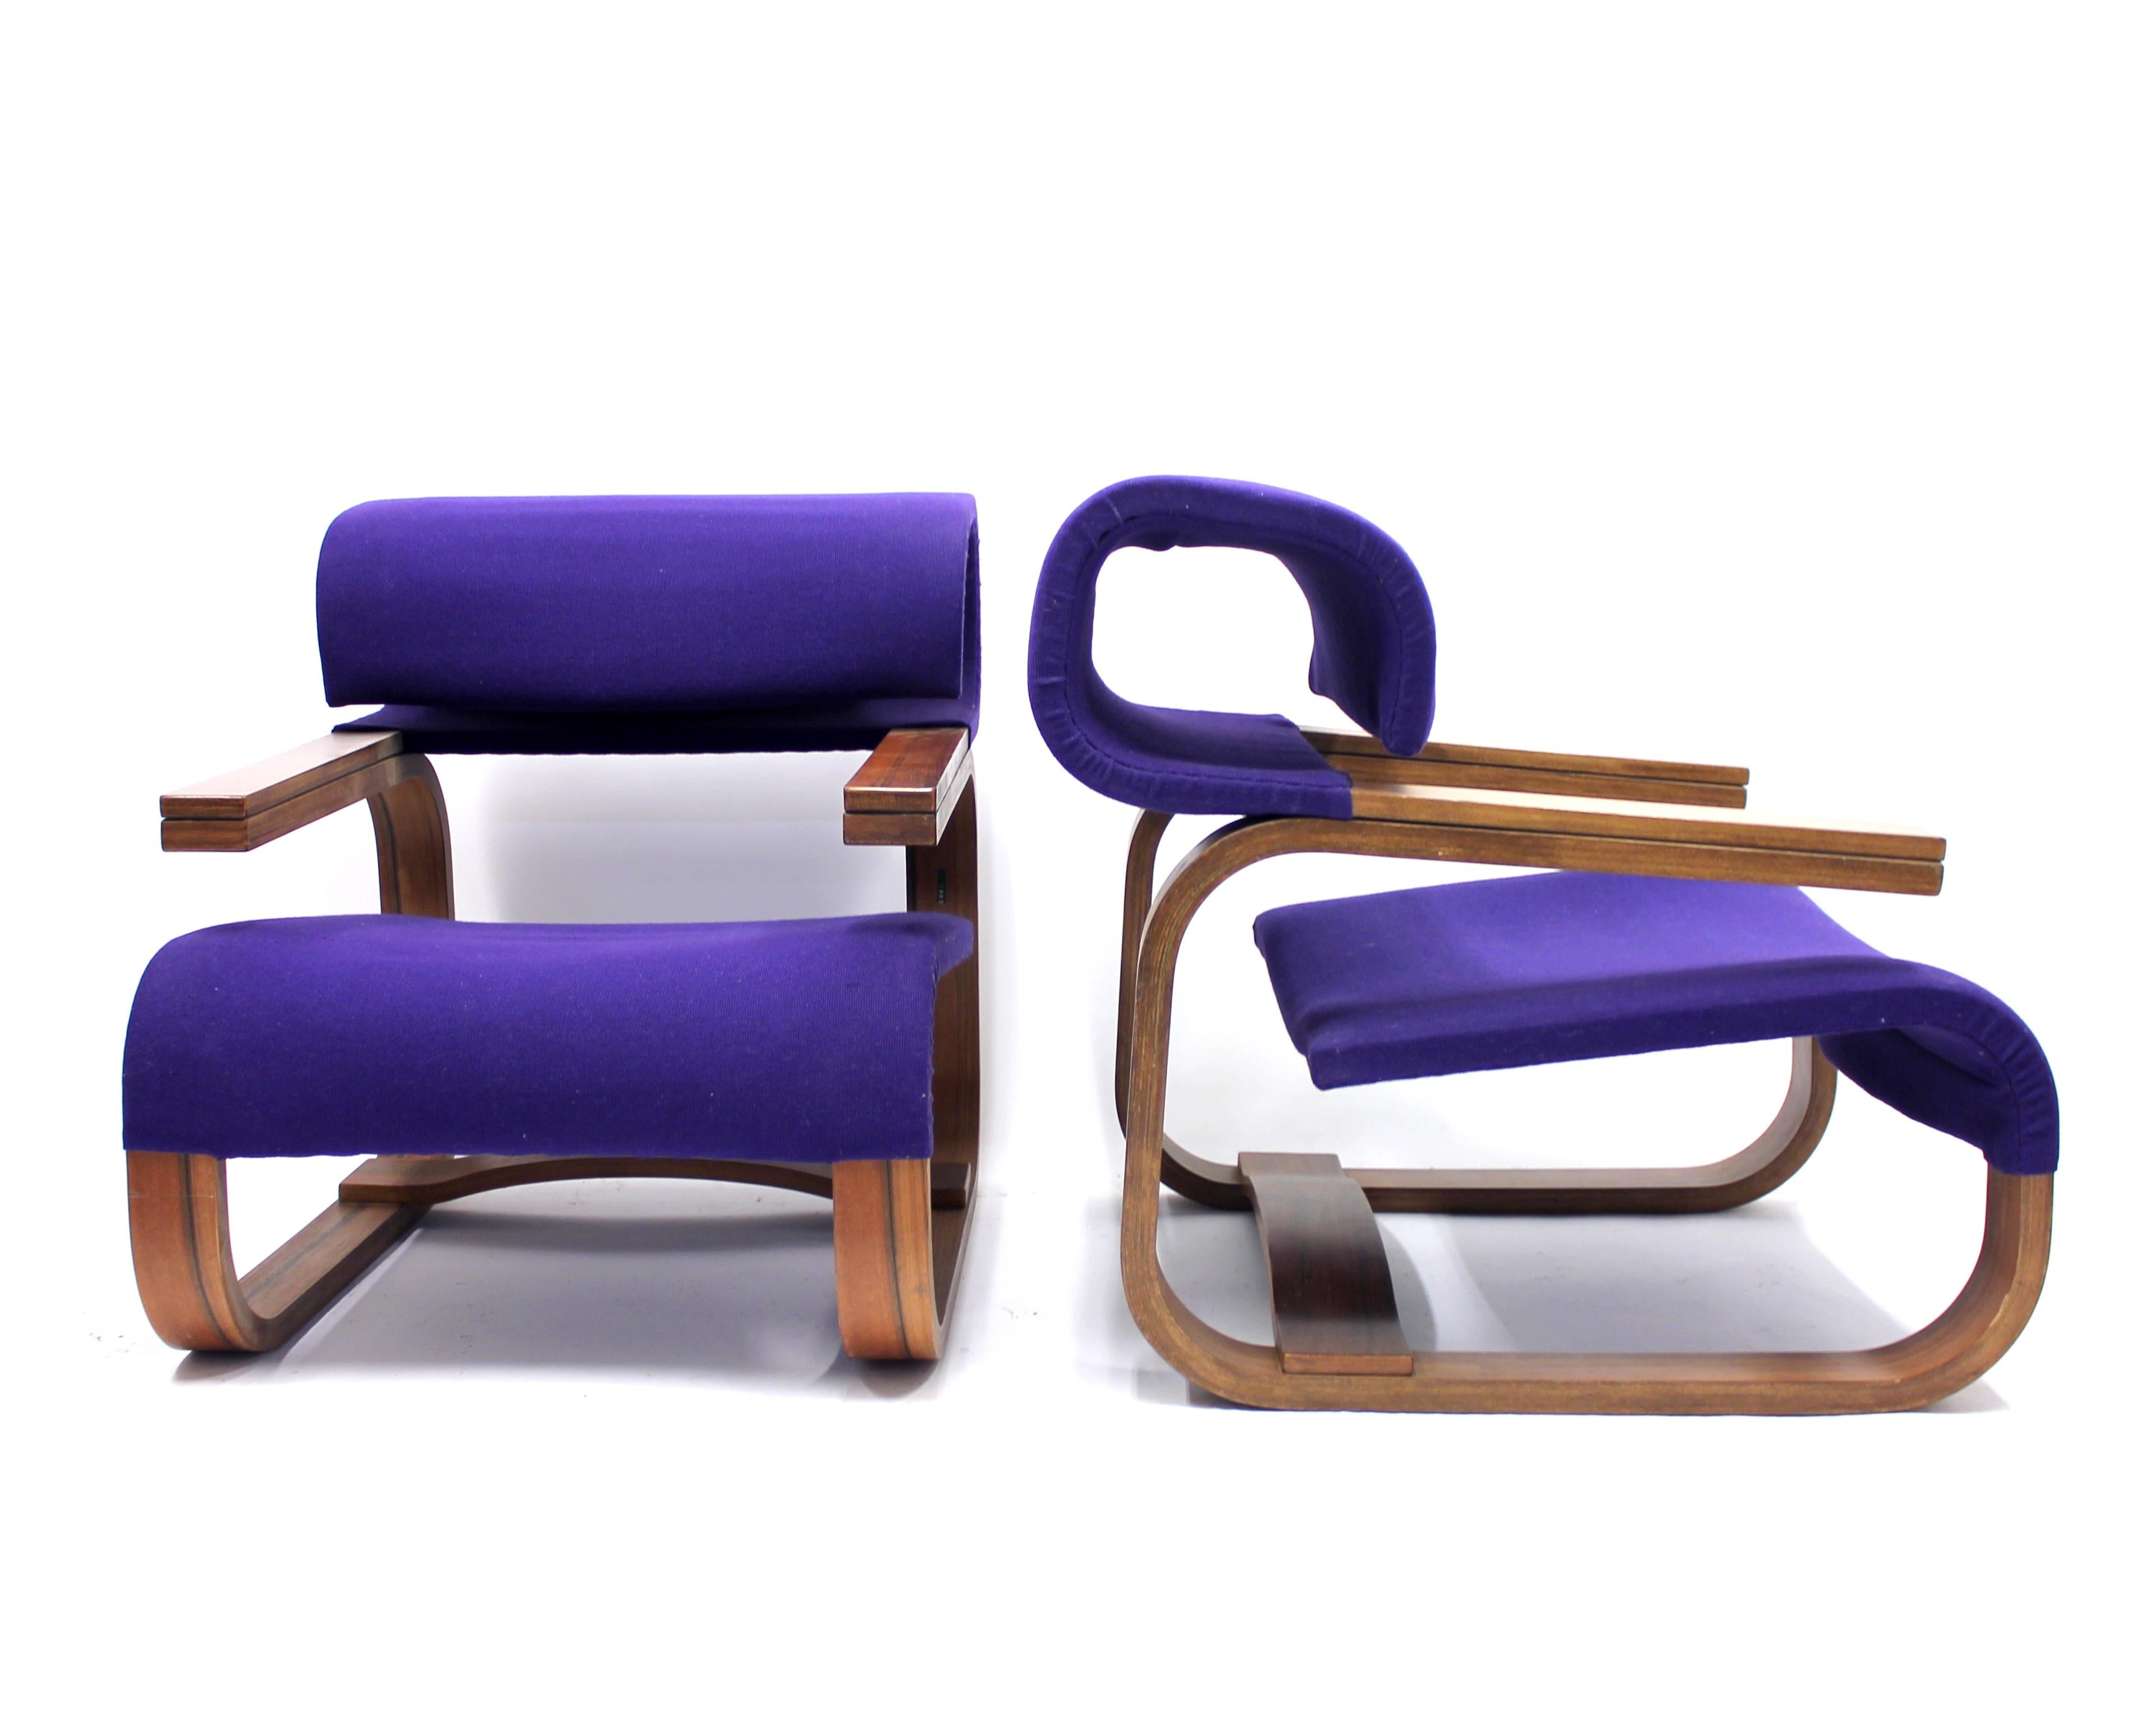 Brutalist Pair of Chairs by Jan Bočan for the Czechoslovakian Embassy, Stockholm, 1972